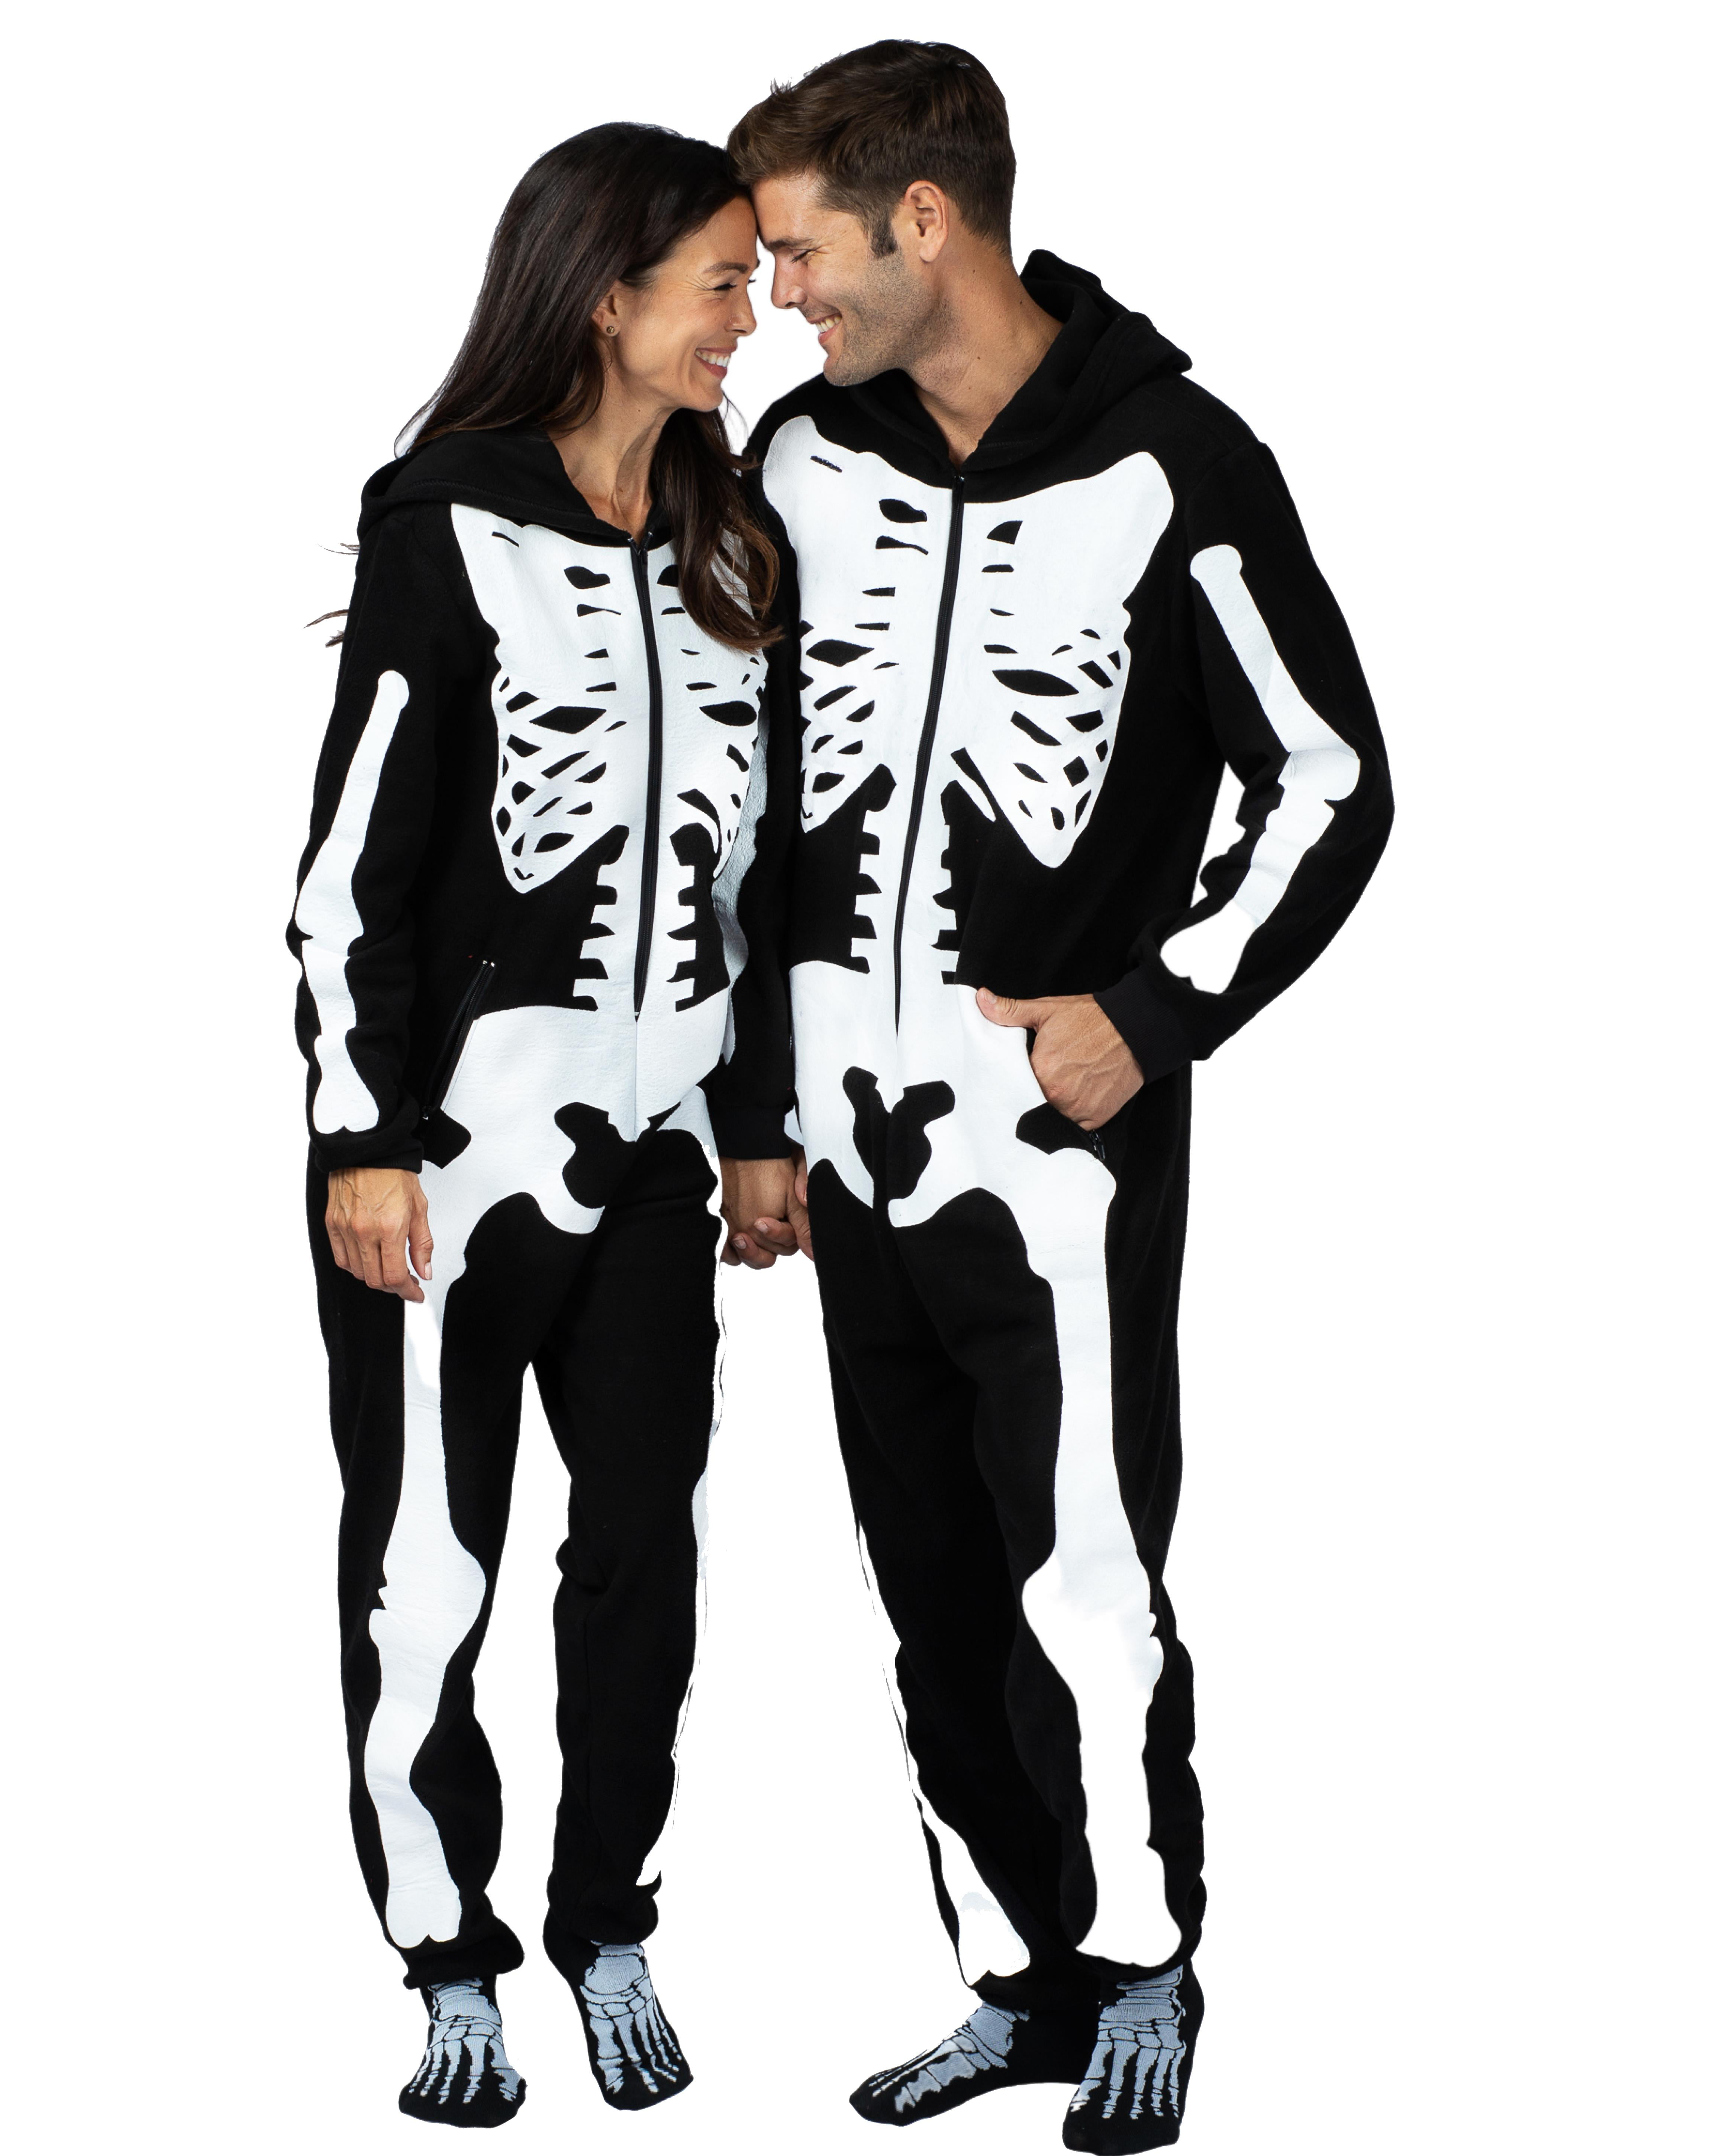 VREWARE trendy hoodies for women,halloween customs for couples,christmas  clearance under 5.00,halloween costumes for couples,valentine  pajamas,womens